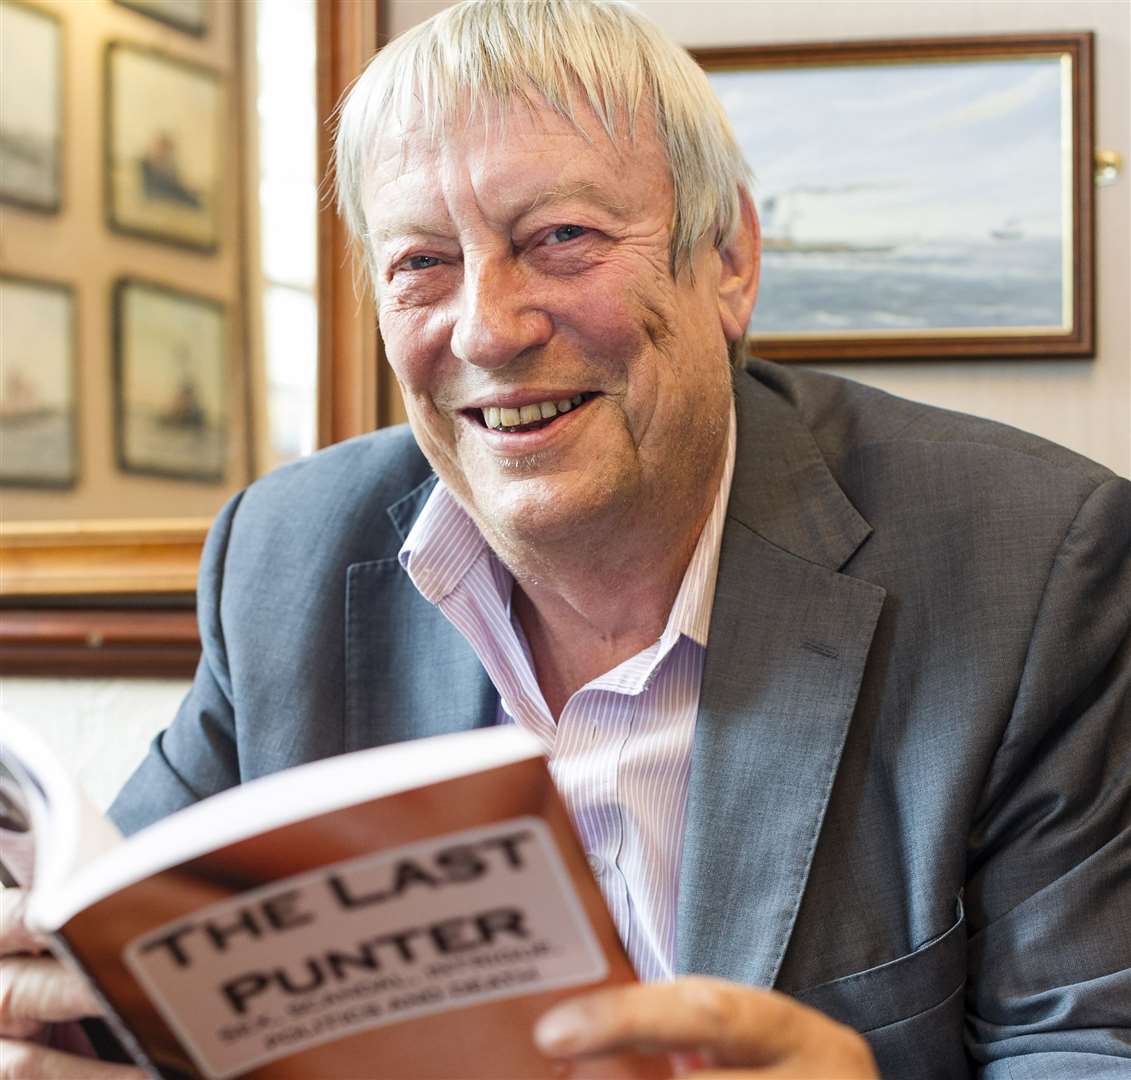 Graham Cole wrote a book, based around Gravesend, The Last Punter